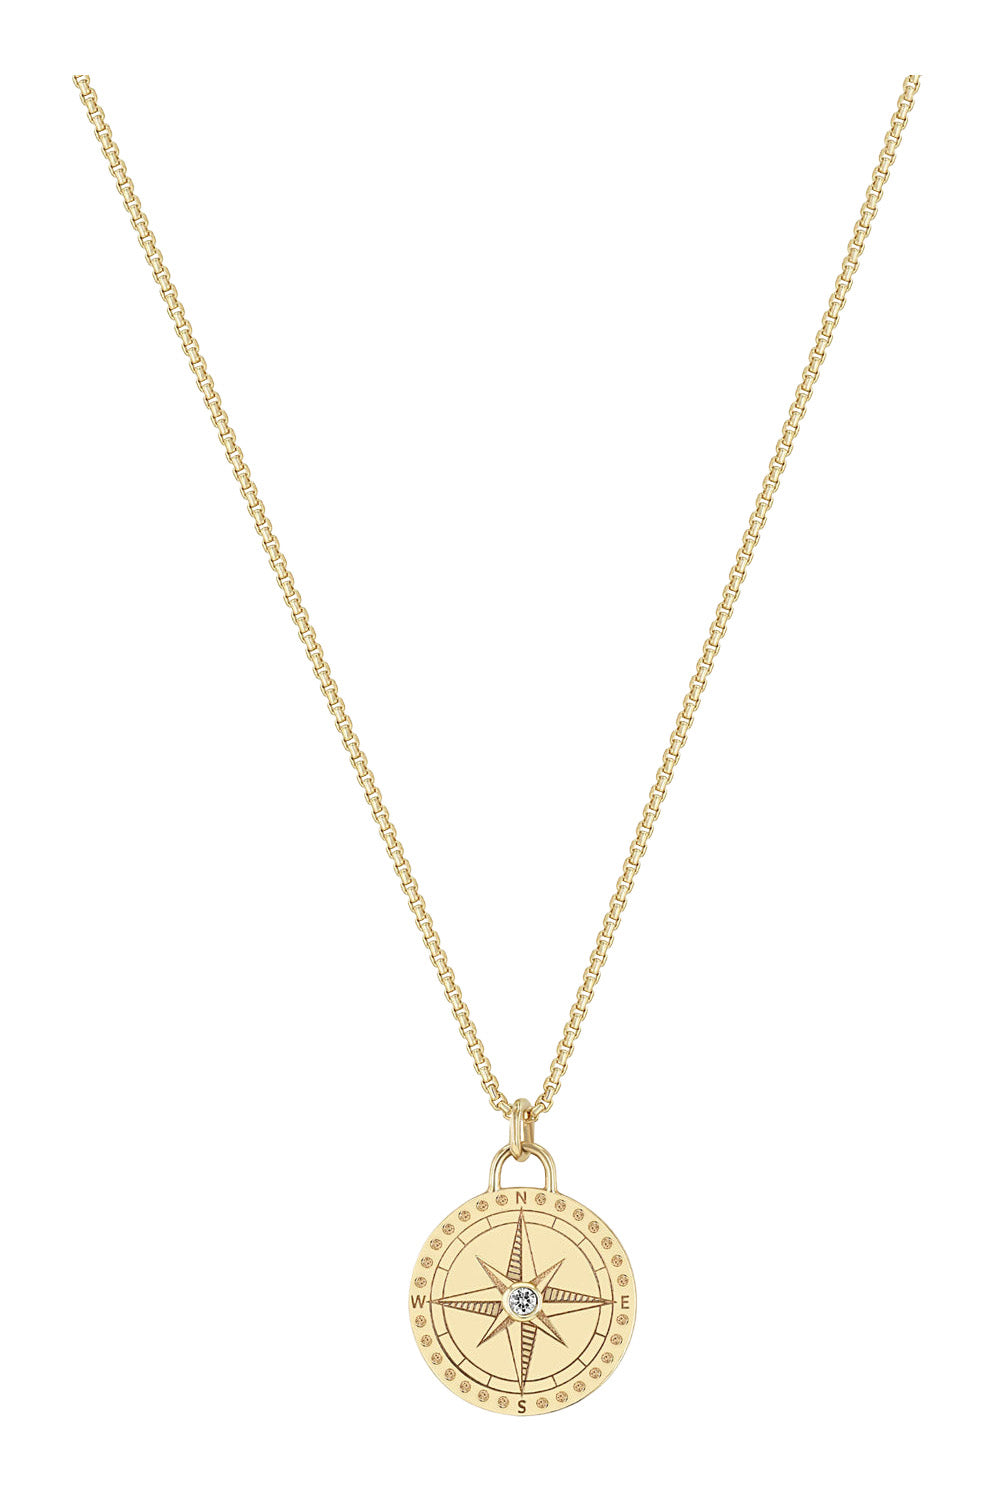 Zoe Chicco Small Compass Medallion Box Chain Necklace in 14k Yellow Gold